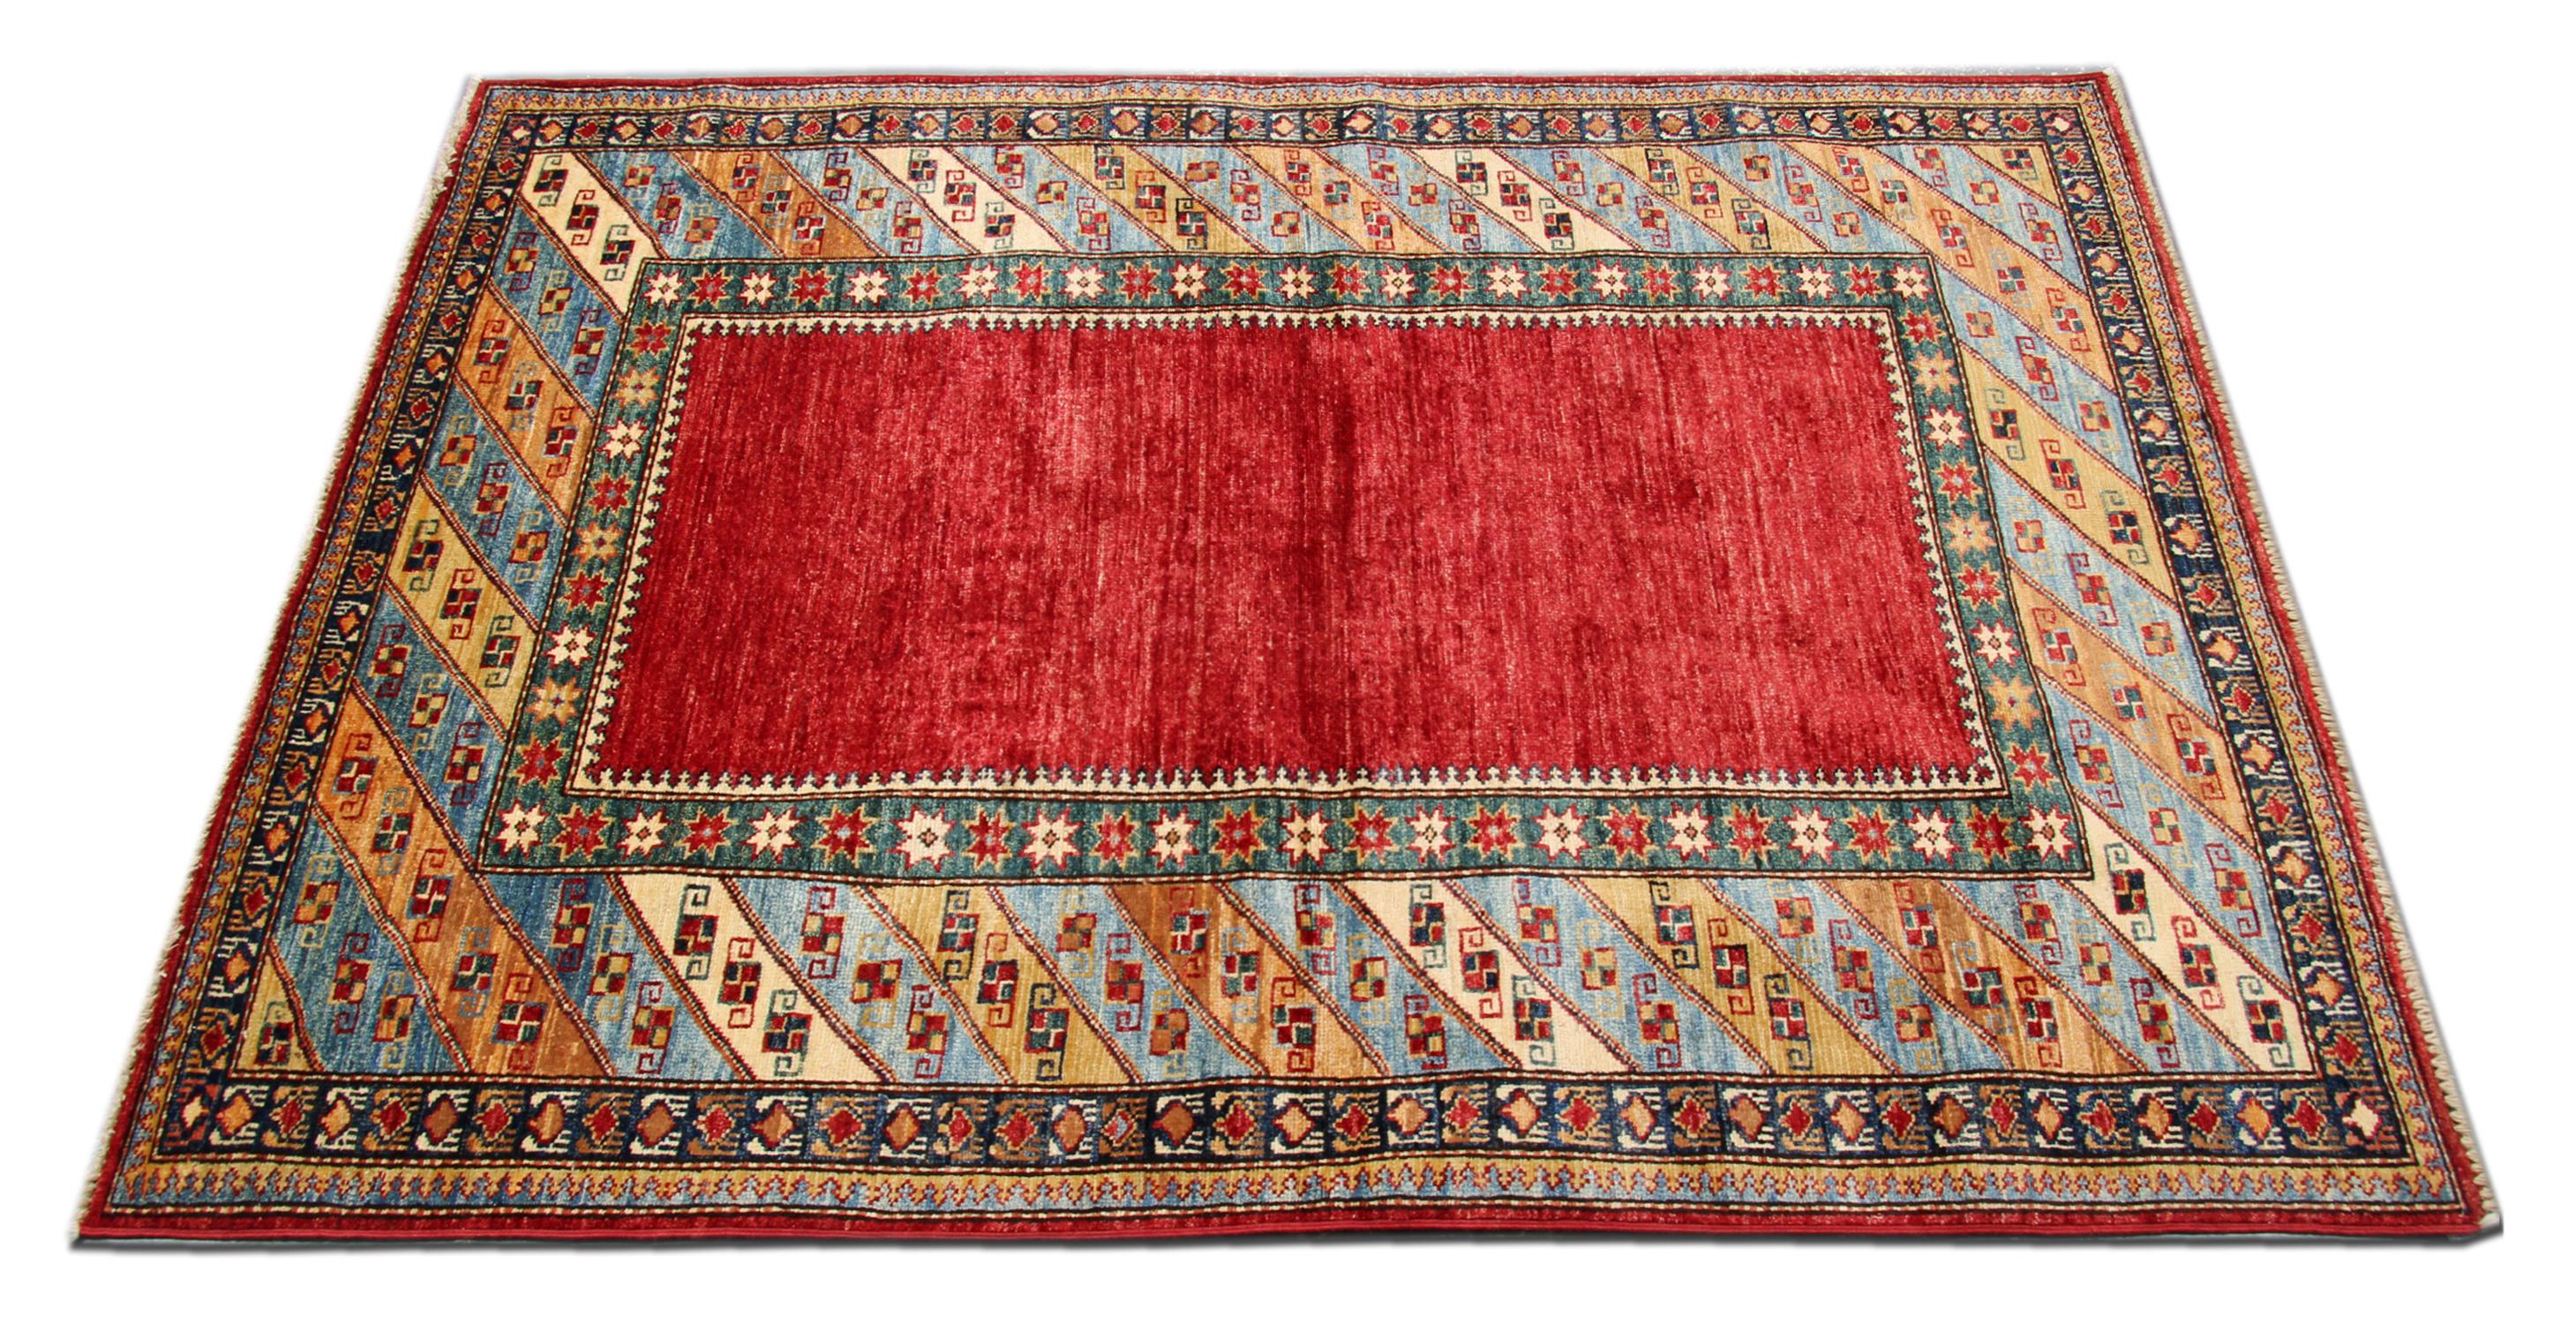 A beautiful new traditional Afghan Kazak rug features a conventional tribal minimal design woven in red, beige, blue and green accents through the centre on a red field. The design is then finished with a highly-detailed repeat pattern border that